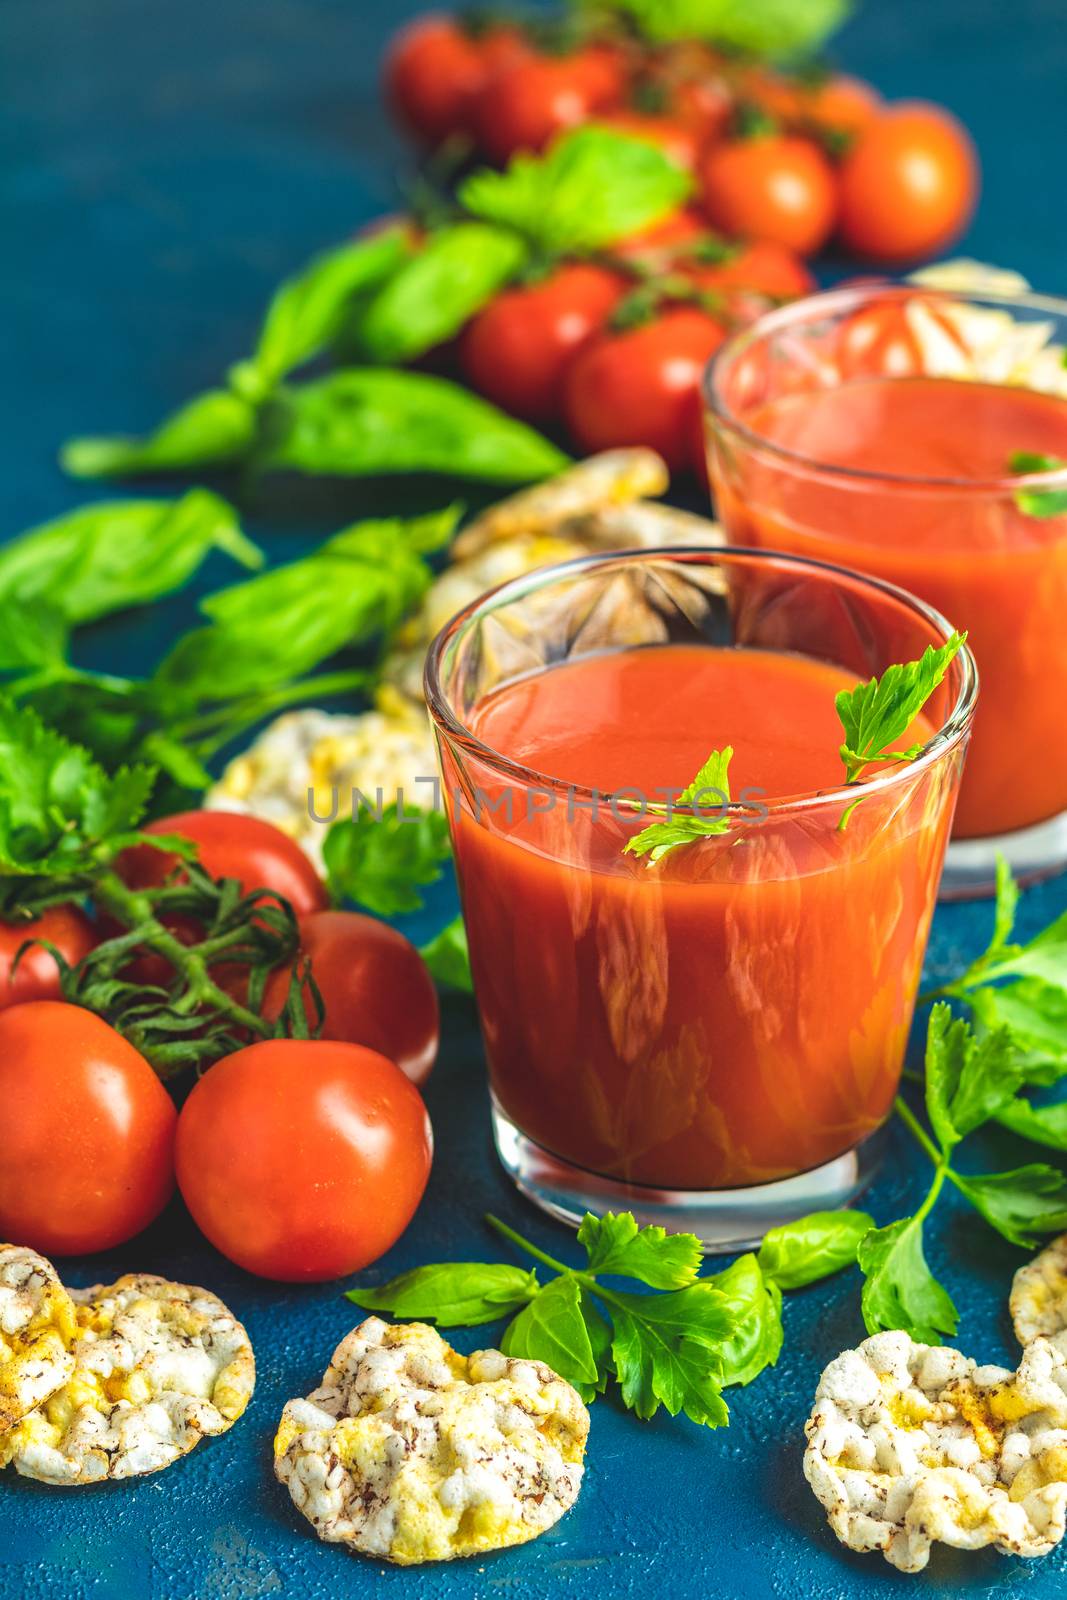 Red cocktail with tomato juice between tomatoes, basil, parsley  by ArtSvitlyna